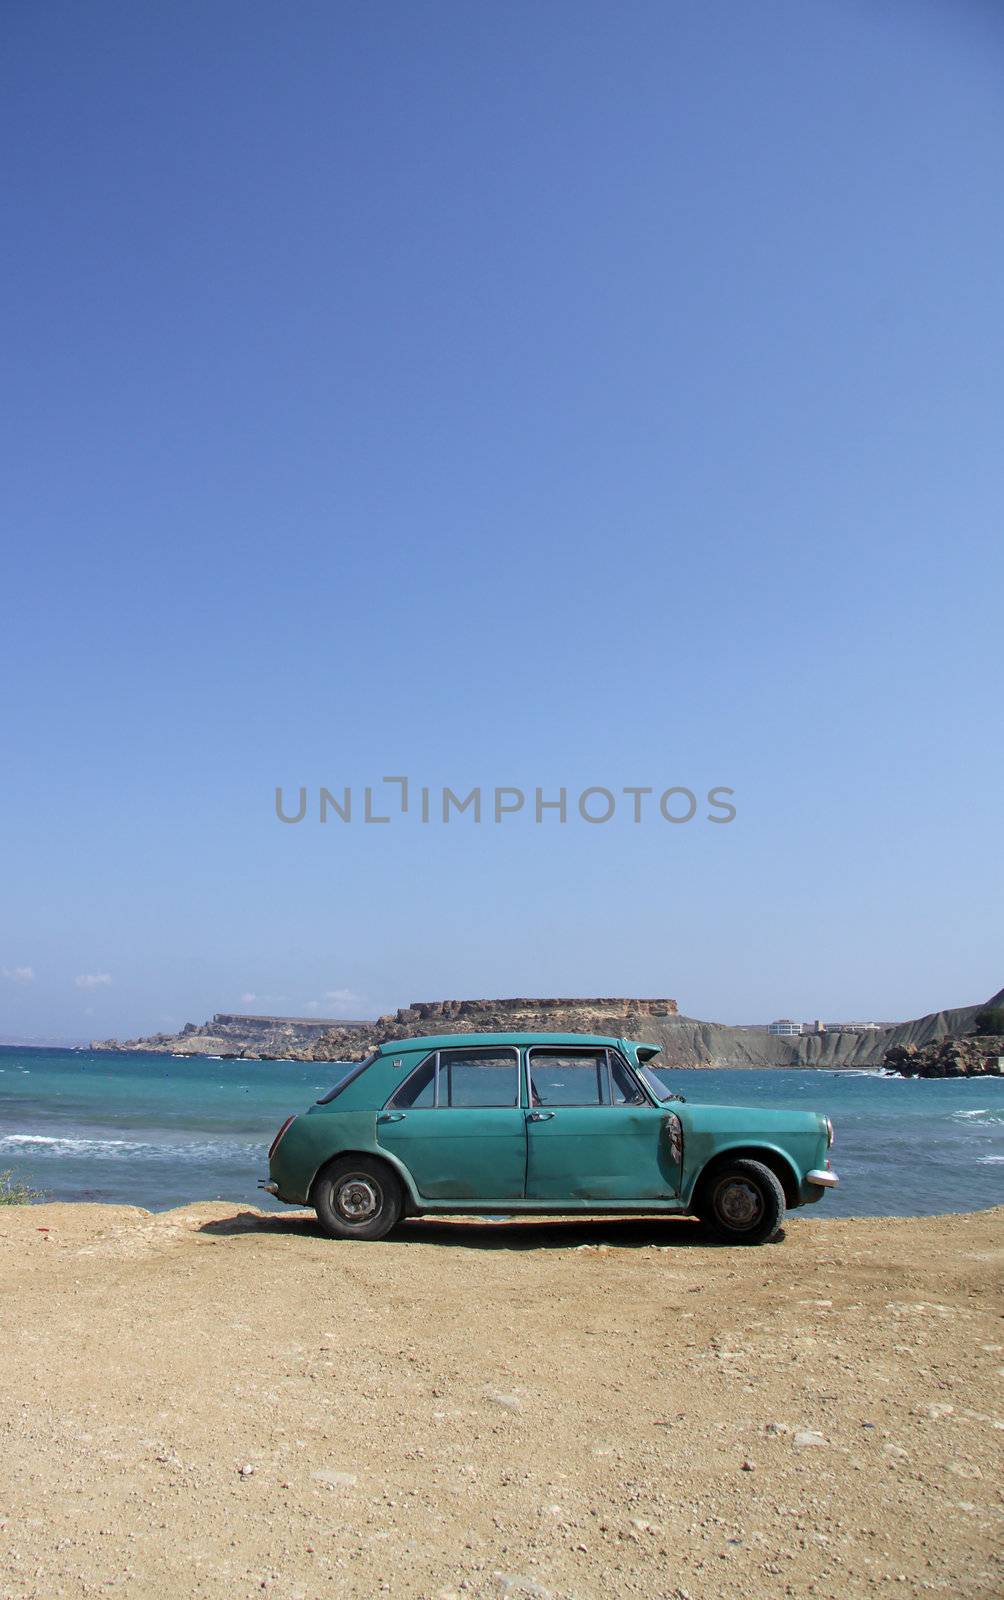 An old rusty car abandoned on a beach by annems